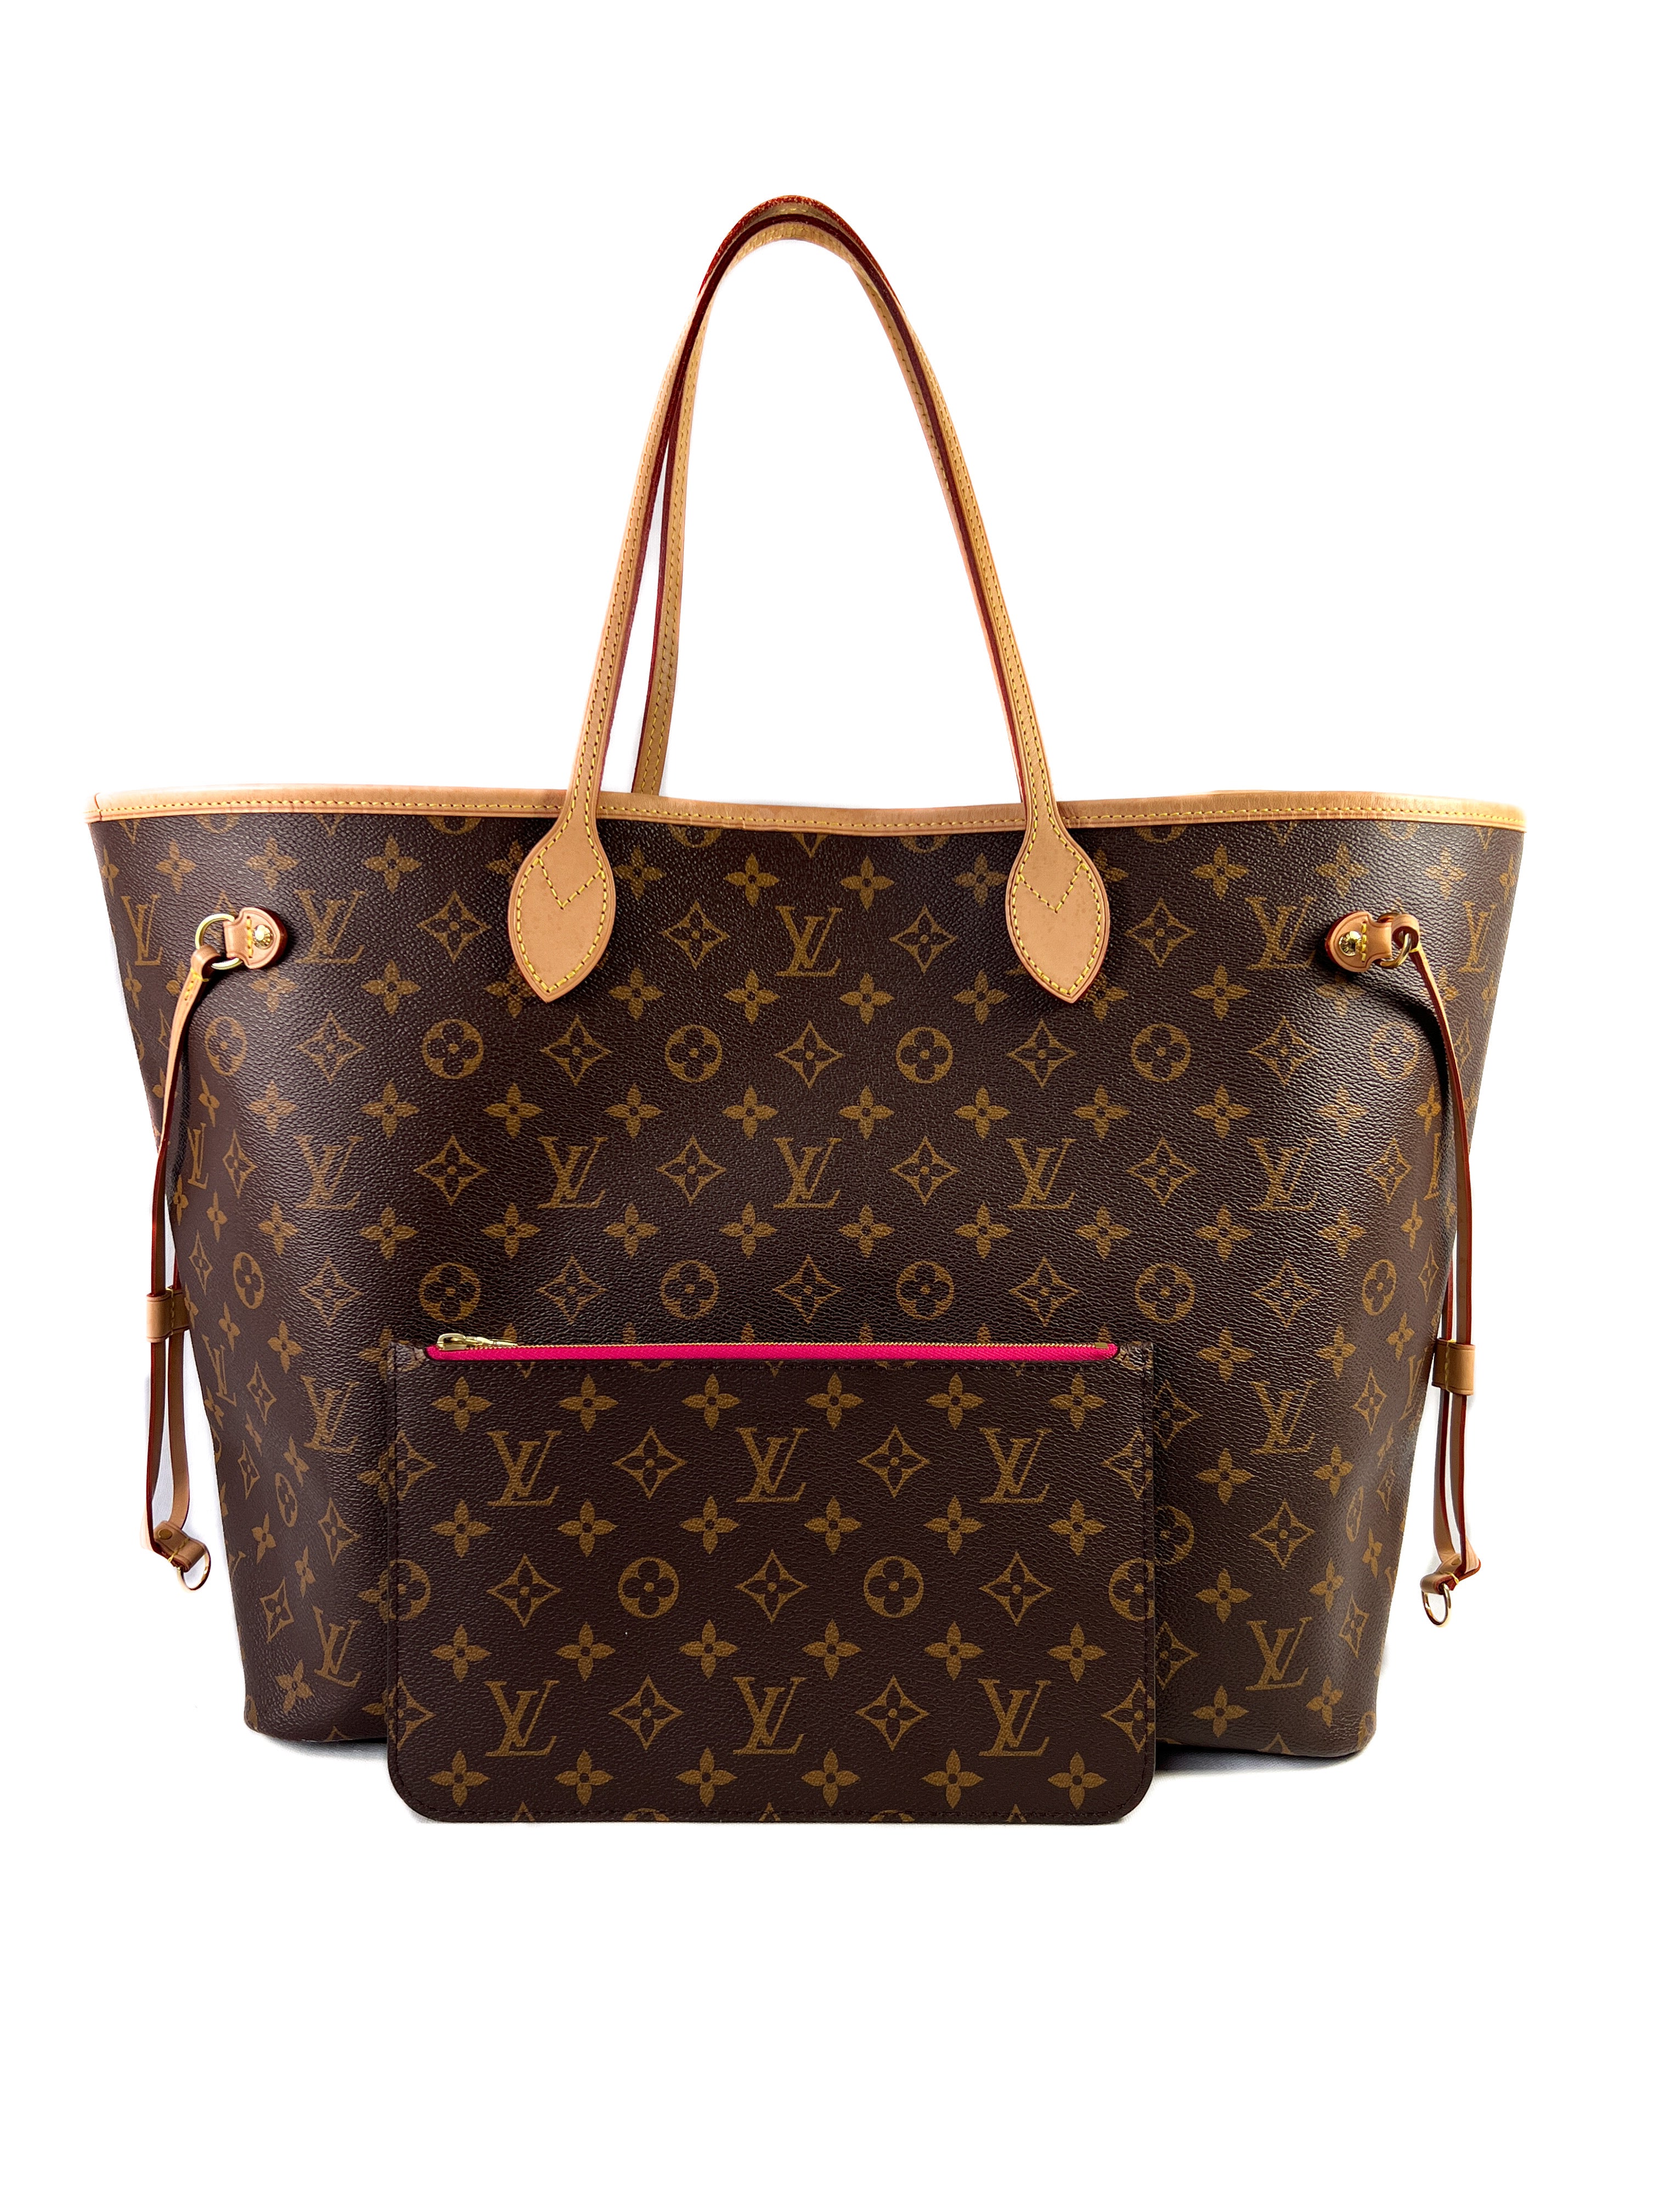 Louis Vuitton, Bags, Louis Vuitton Neverfull Gm In Peony